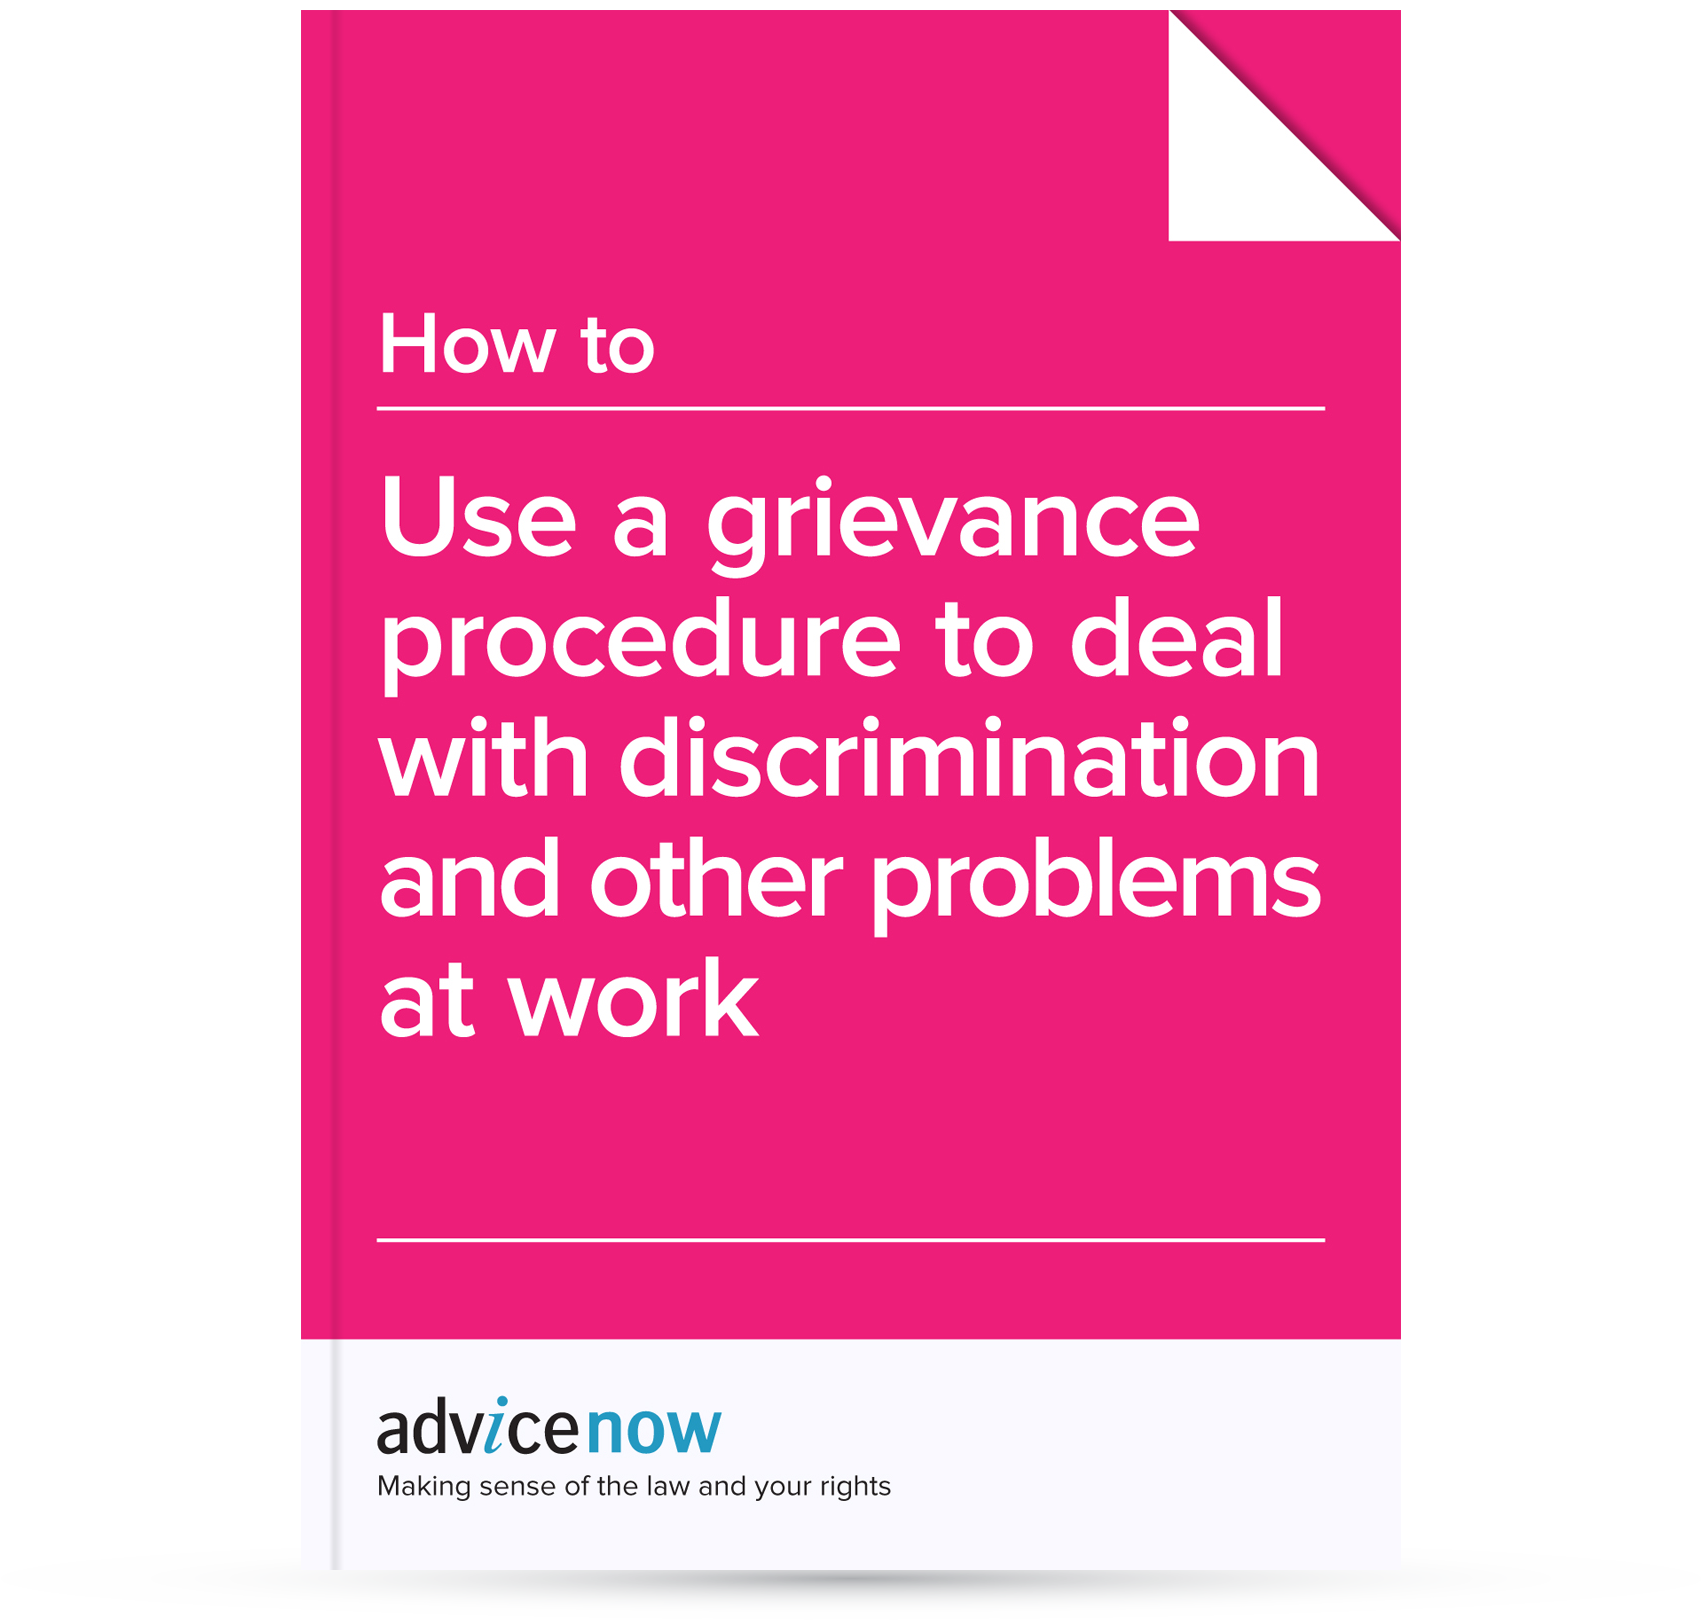 How To Use A Grievance Procedure To Deal With Discrimination And